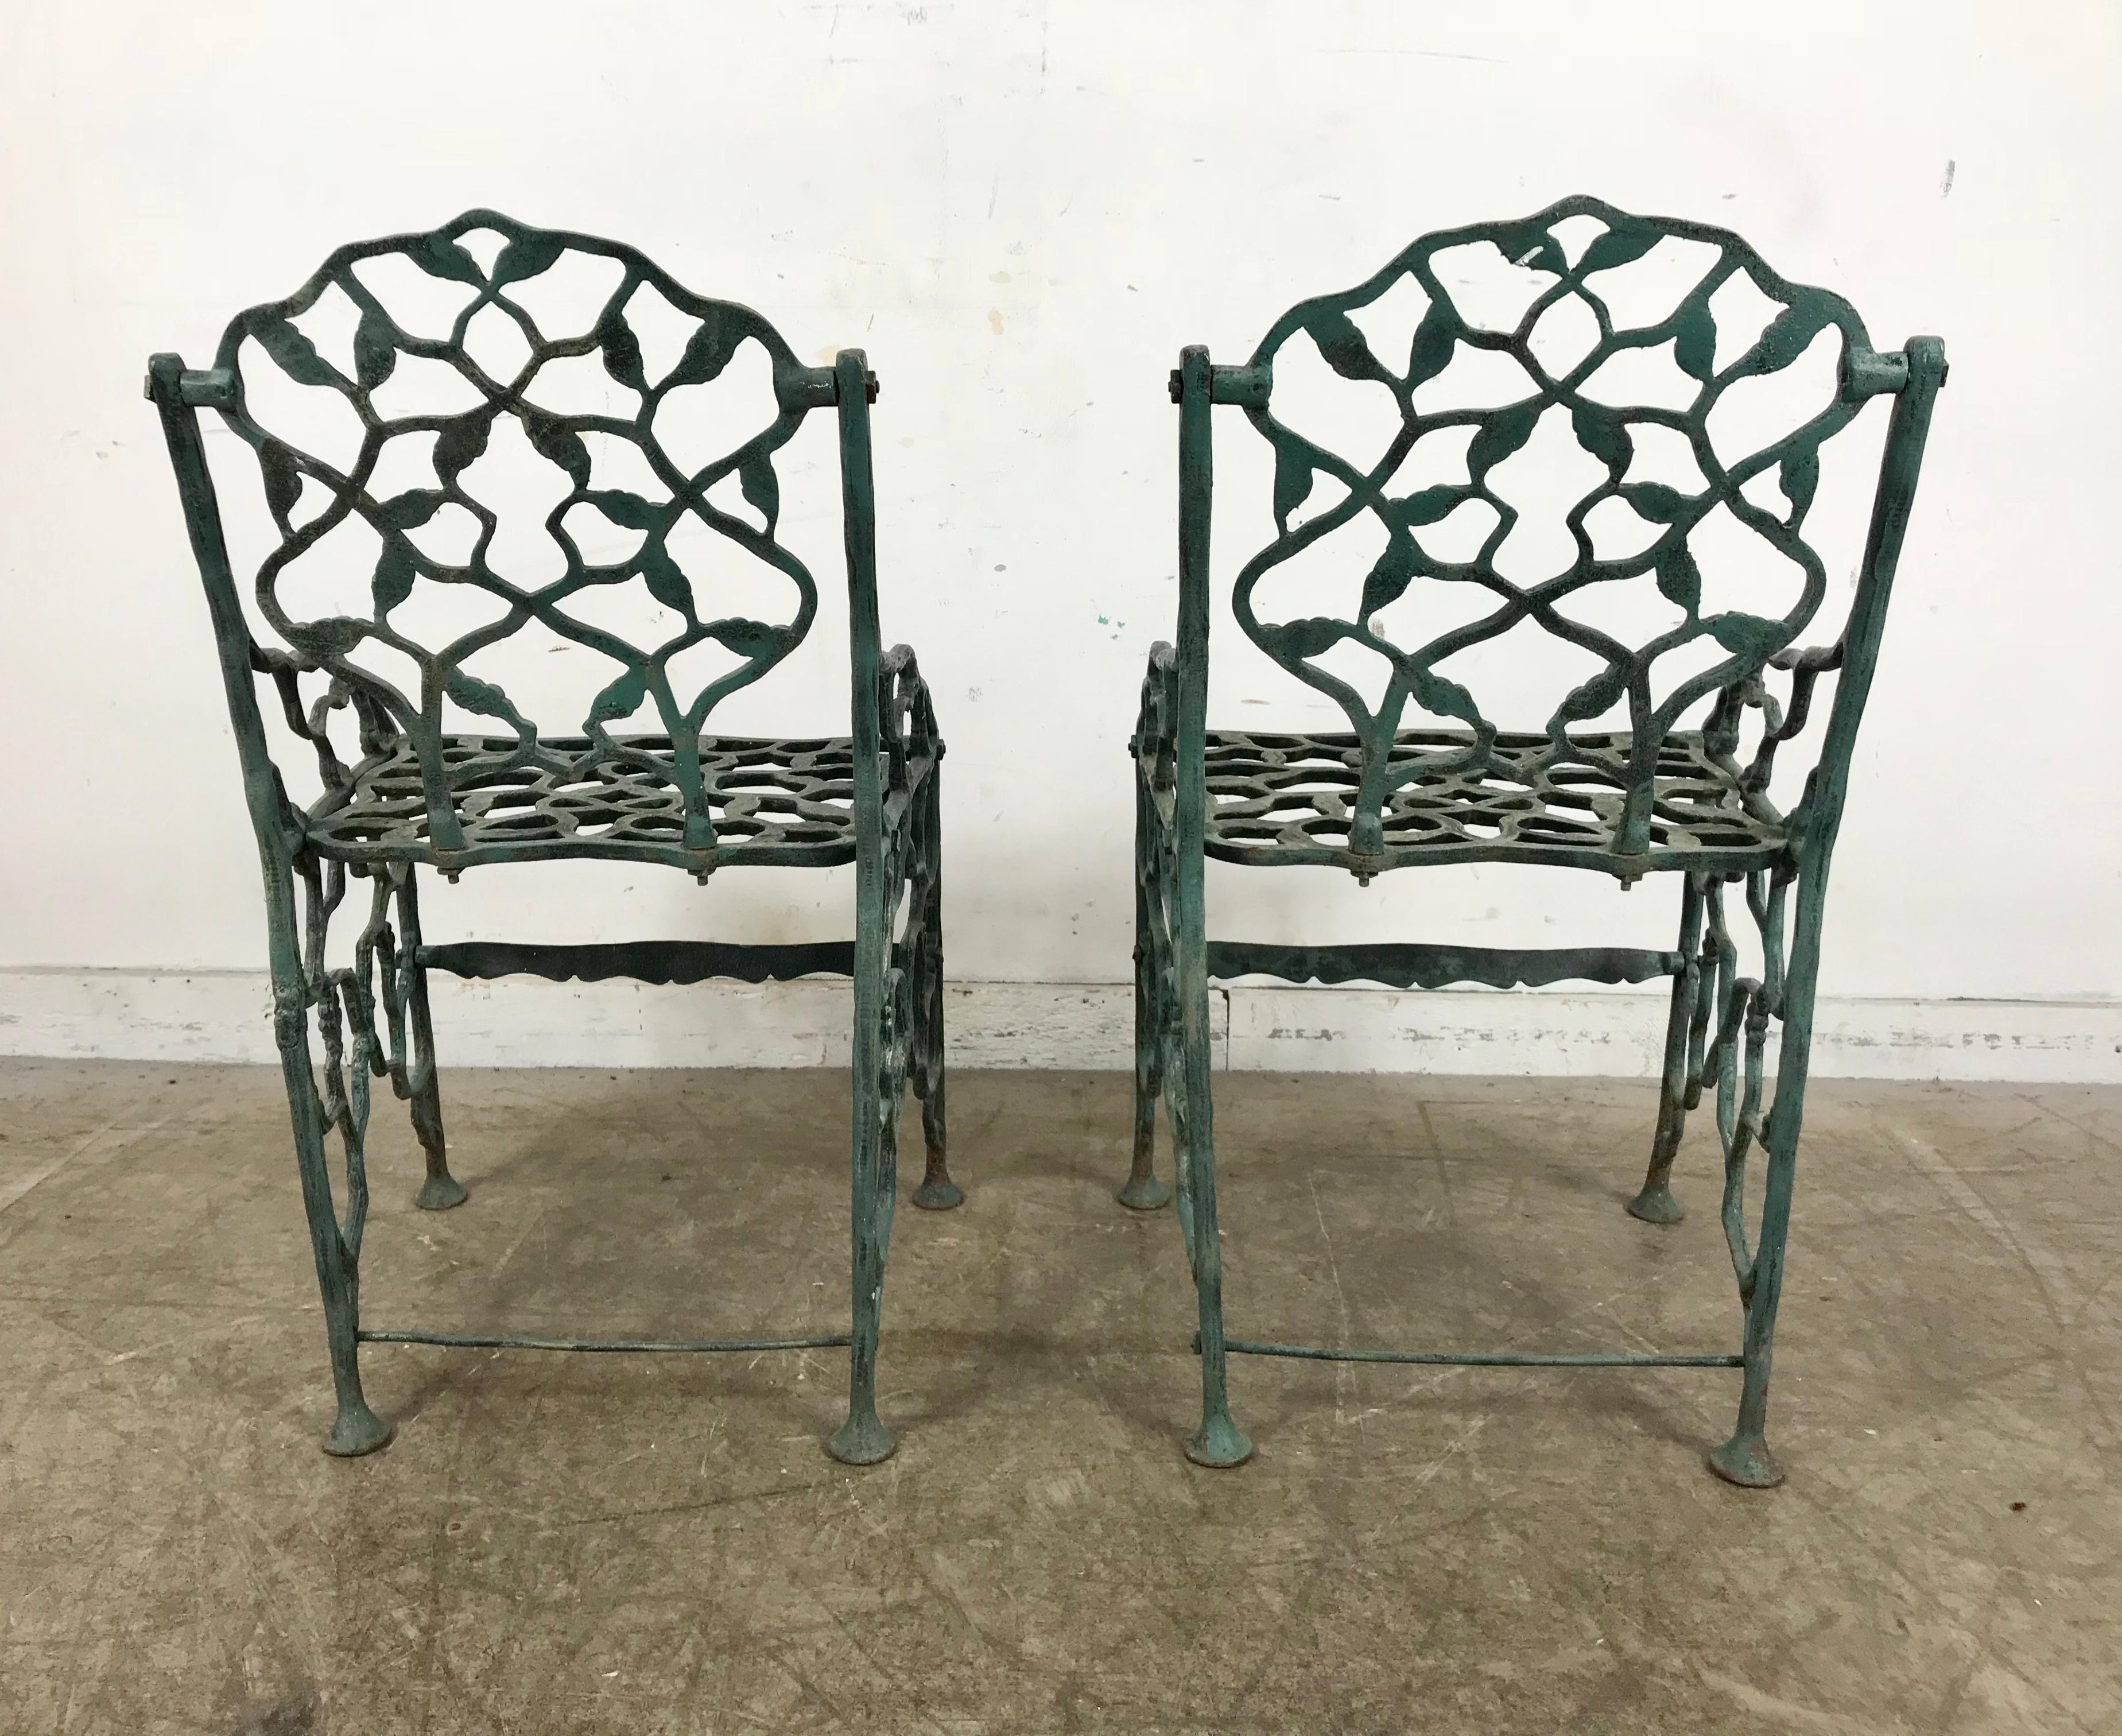 Early 20th Century Early Rustic Cast Iron Garden Chairs 